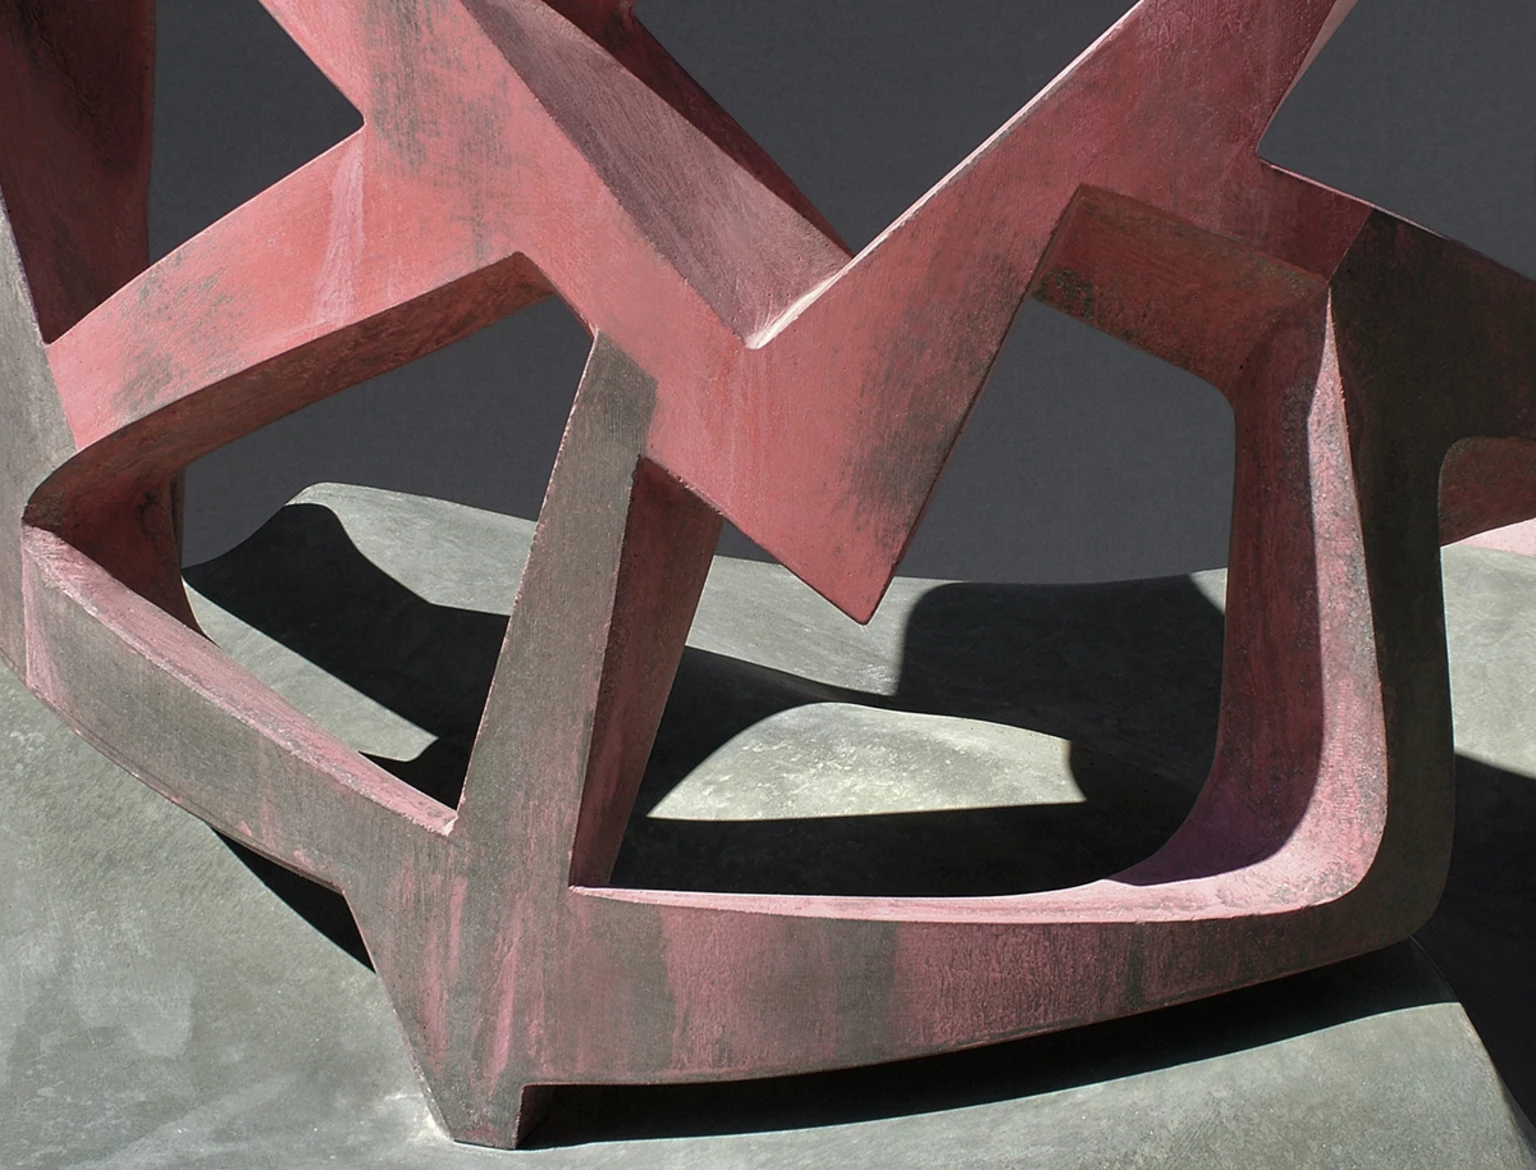 Gate, 2010 - colored and painted concrete, 50 x 60 x 94 cm